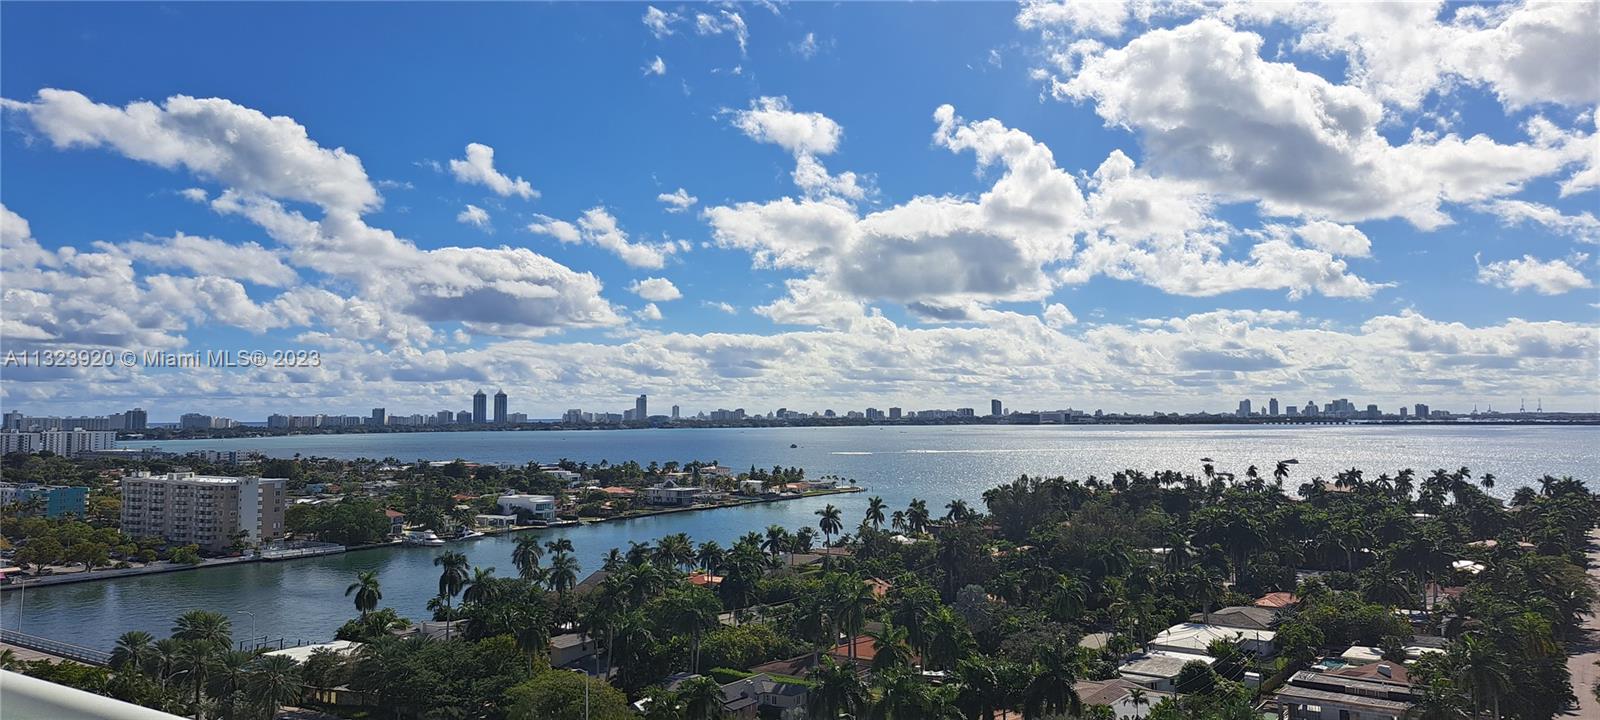 Corner Penthouse at 360 Condominium in North Bay Village overlooking Biscayne Bay with views of Miami Downtown Skyline and just minutes to the Beach. This quiet corner 1552 sq.ft unit has 11' ceilings, high impact floor-to-ceiling windows and an open floor plan. Spacious 2 bedroom with large den with breathtaking views of the bay. The unit comes with 2 parking spots, free unlimited valet spaces for residents and guests, great amenities such as: state of the art fitness center with saunas, 2 pools, clubhouse, 24 hours gated security and front desk attendants. Basic cable and internet included.